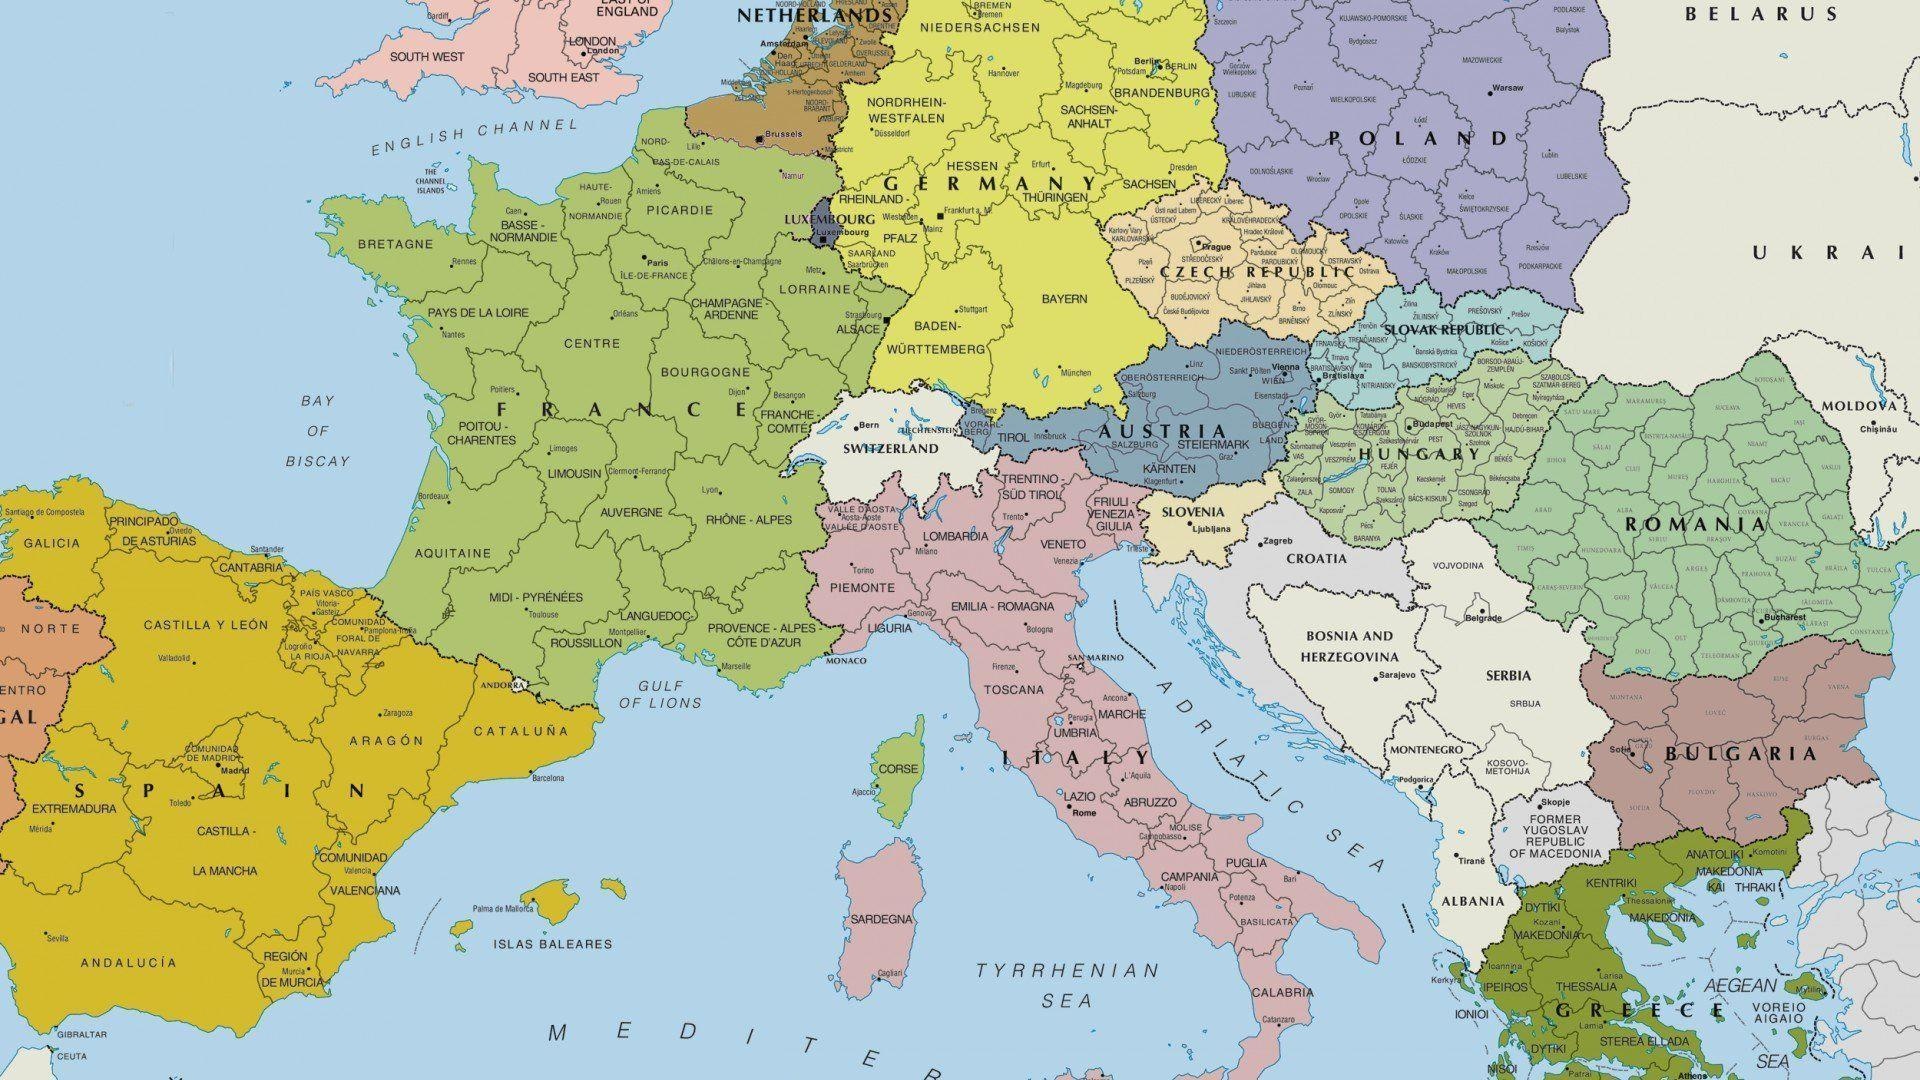 Europe's geography, HD map wallpapers, Continent's diversity, Geographic exploration, 1920x1080 Full HD Desktop